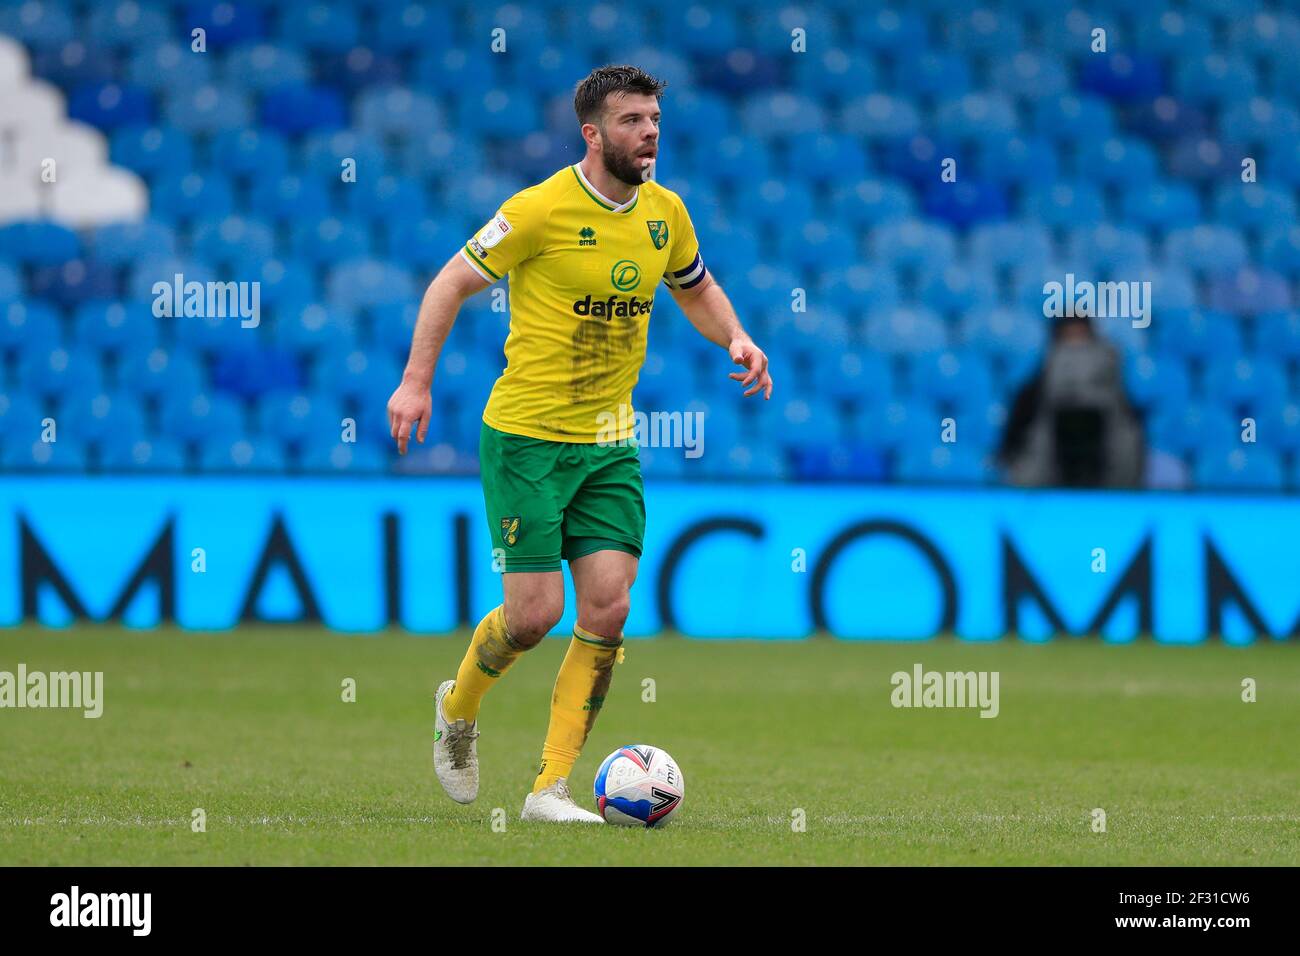 Sheffield, UK. 14th Mar, 2021. Grant Hanley #5 of Norwich City controls the ball in Sheffield, UK on 3/14/2021. (Photo by Conor Molloy/News Images/Sipa USA) Credit: Sipa USA/Alamy Live News Stock Photo